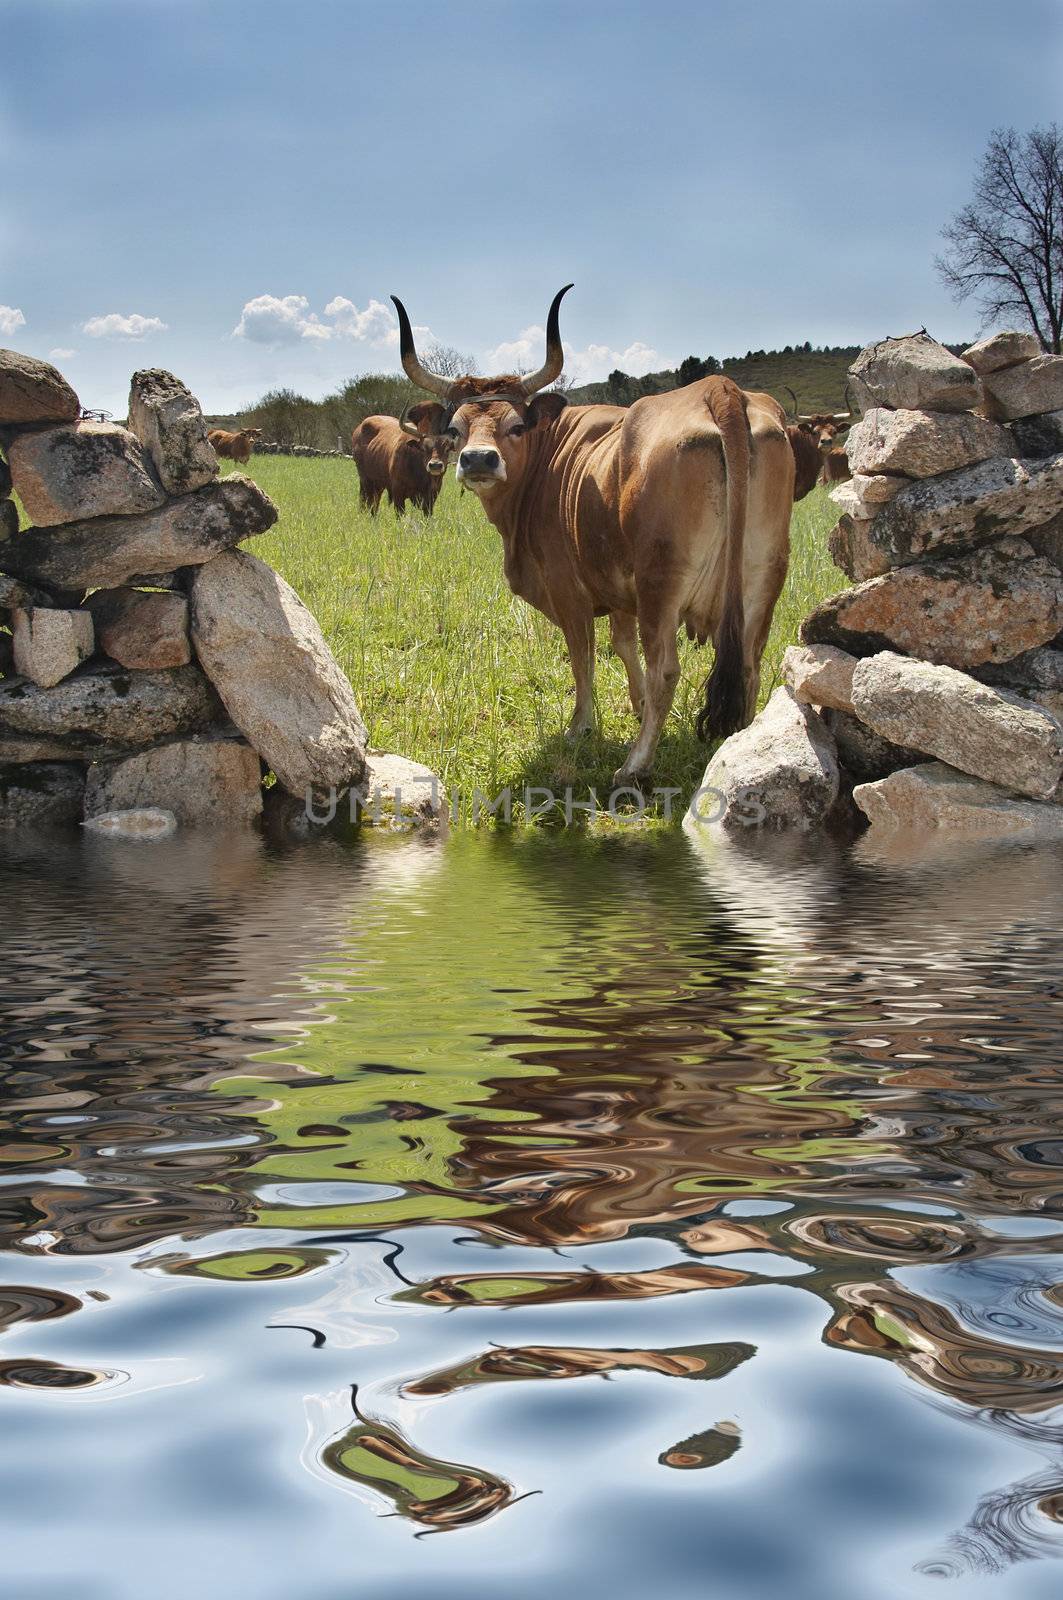 two cows reflected

